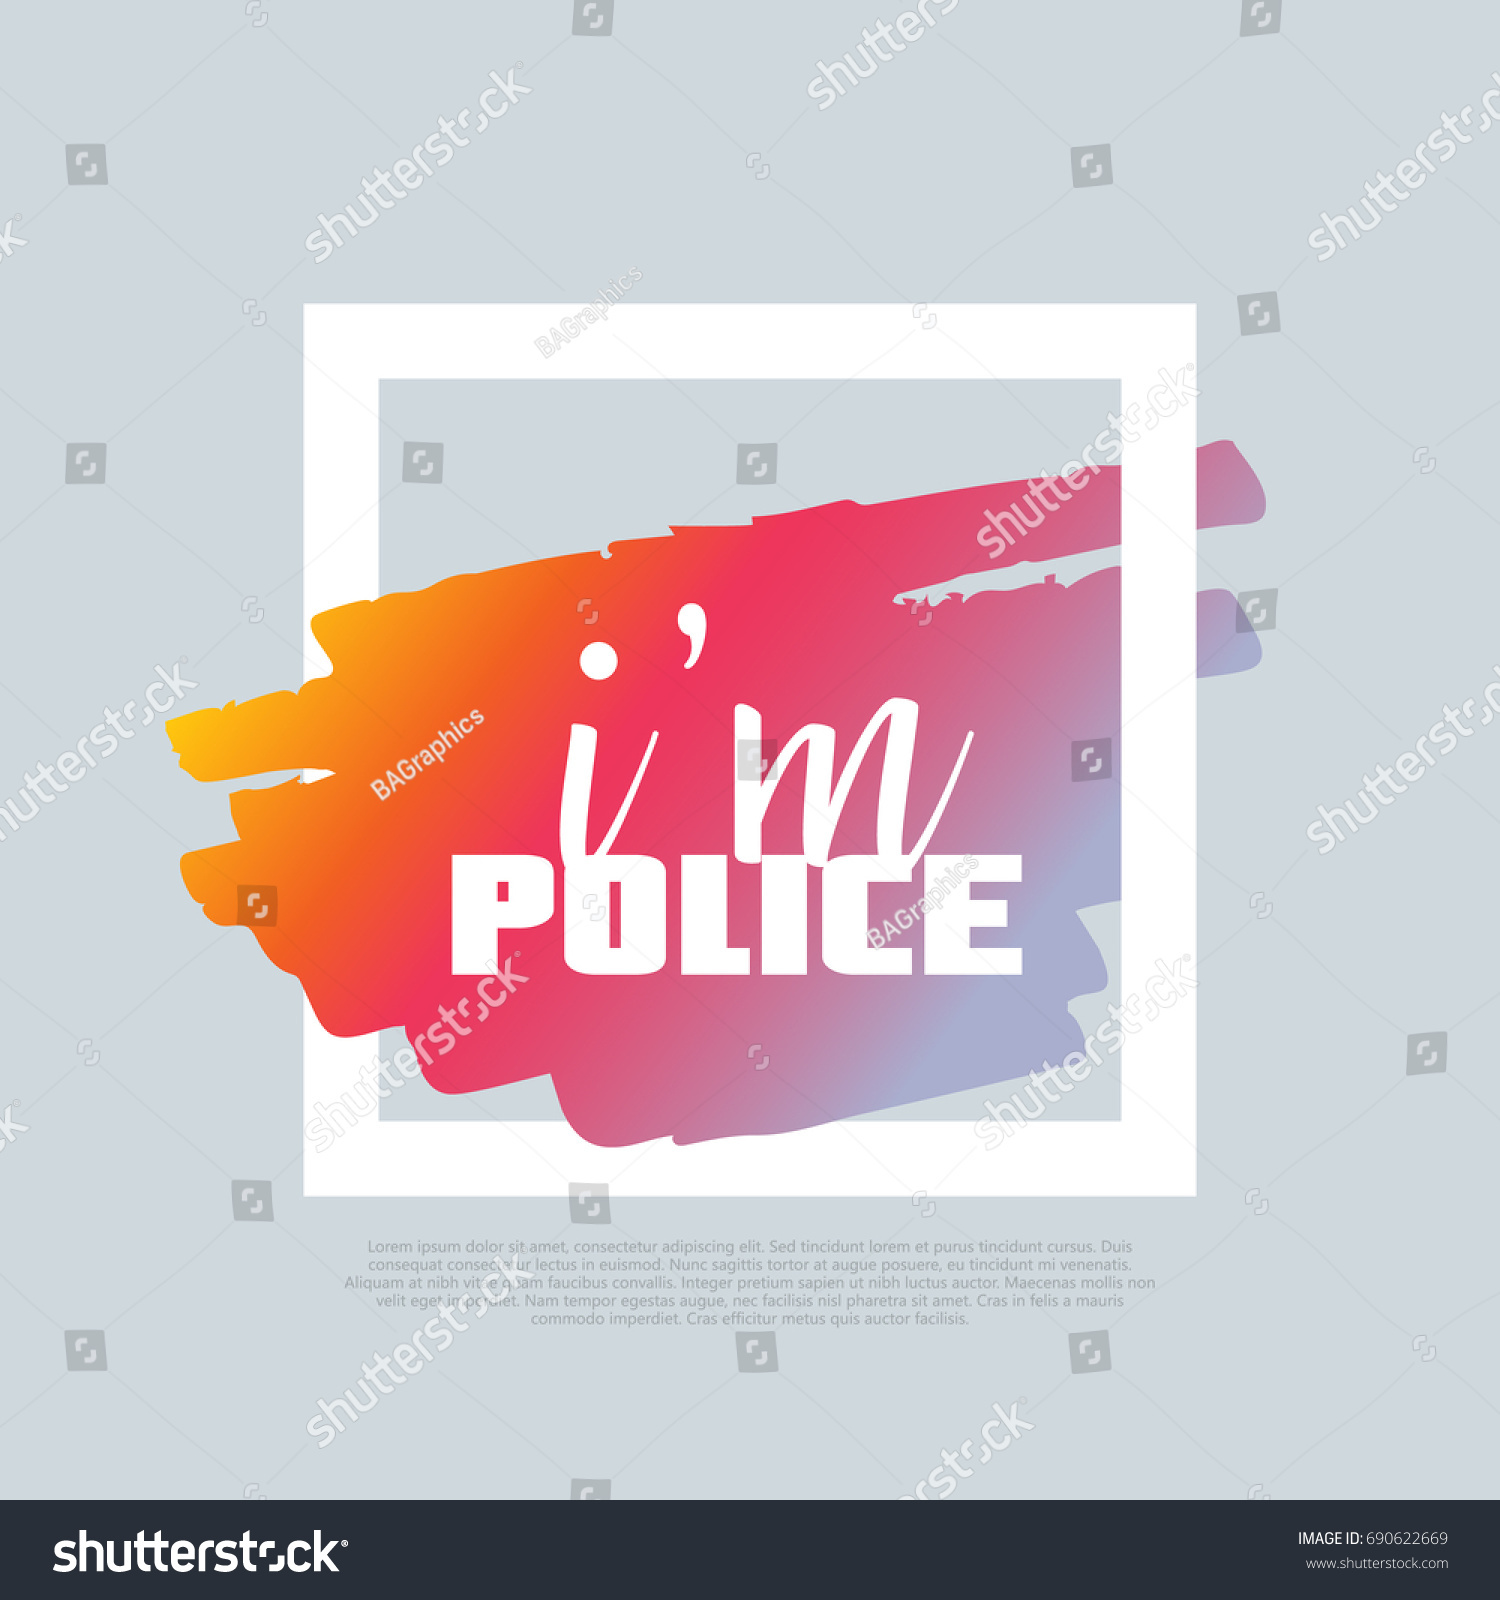 SVG of I'm Police. Vector clip-art template, poster design. Motto, label, text. Compatible wtih PNG, JPG, AI, CDR, SVG, PDF and EPS. svg